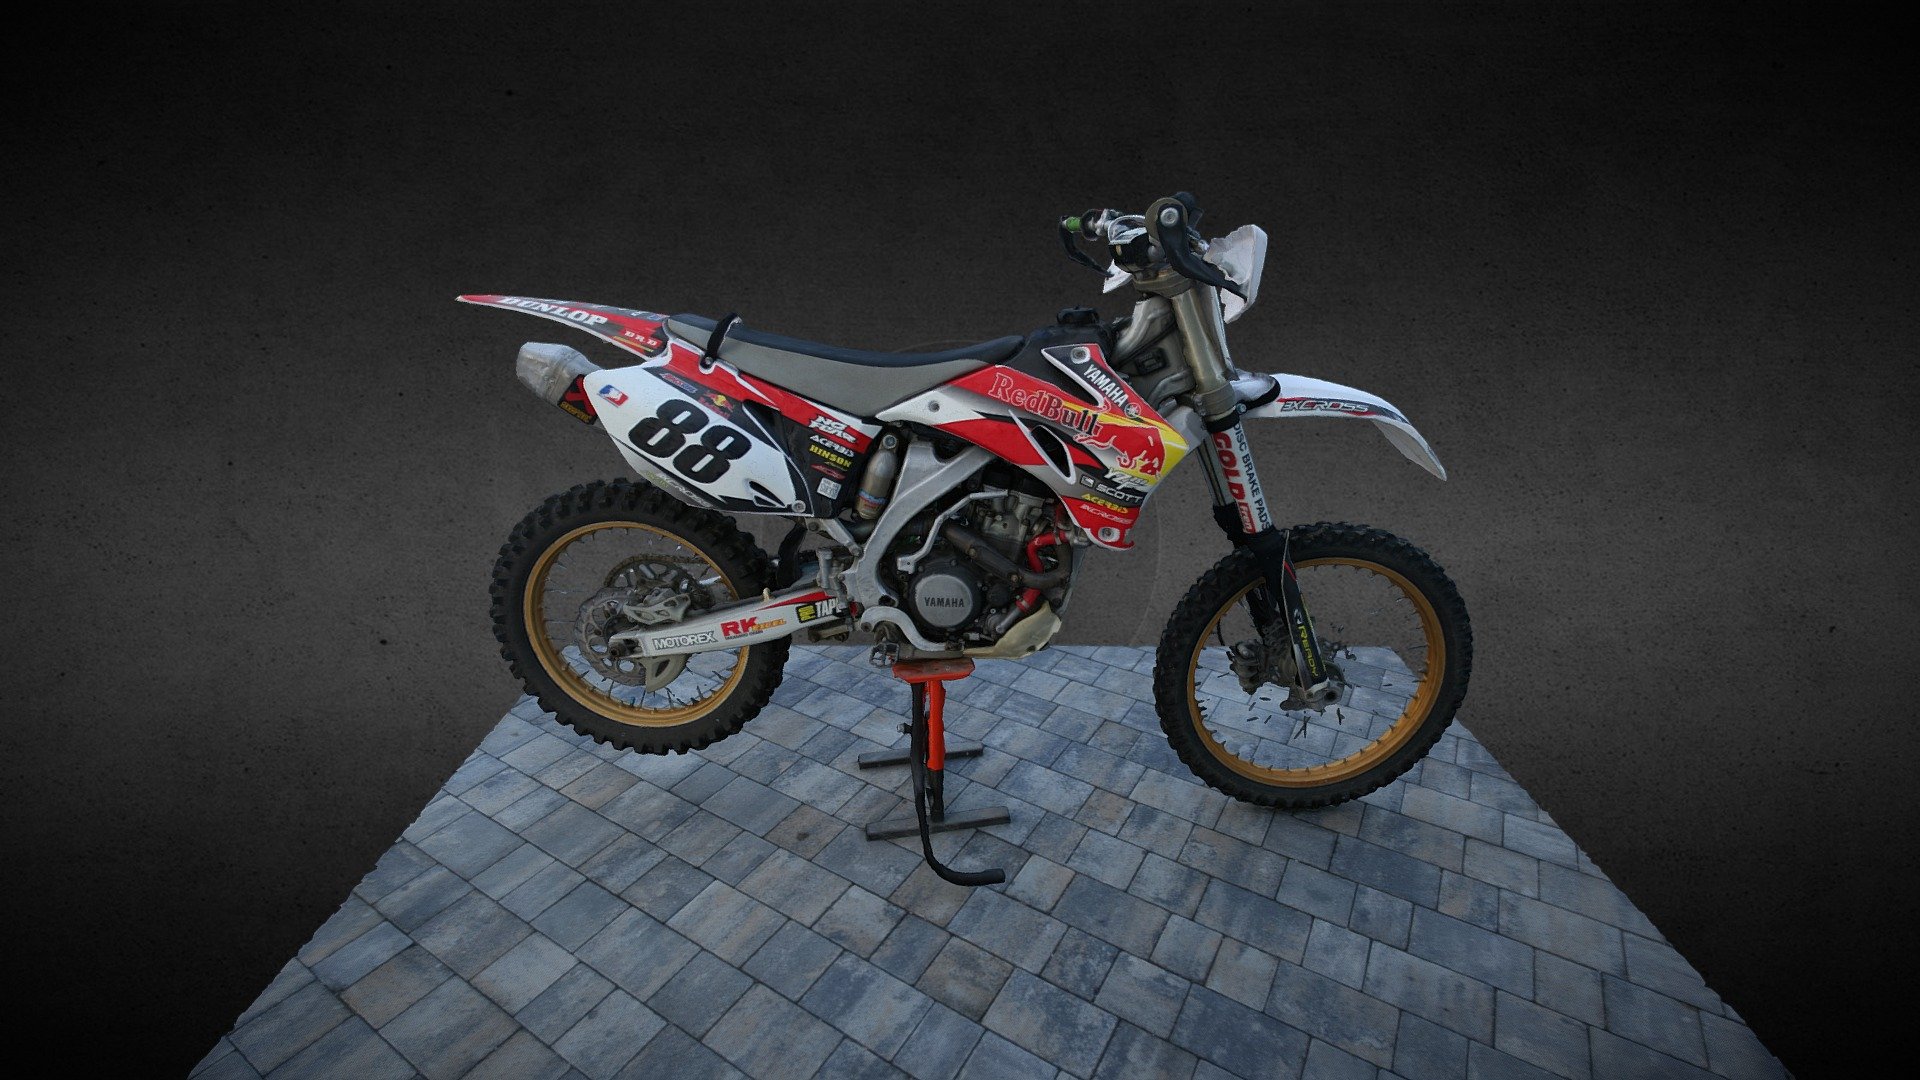 Photogrammetry model of Yamaha YZ250F

Created in RealityCapture by Capturing Reality from 307 images in 01h:03m:53s 3d model